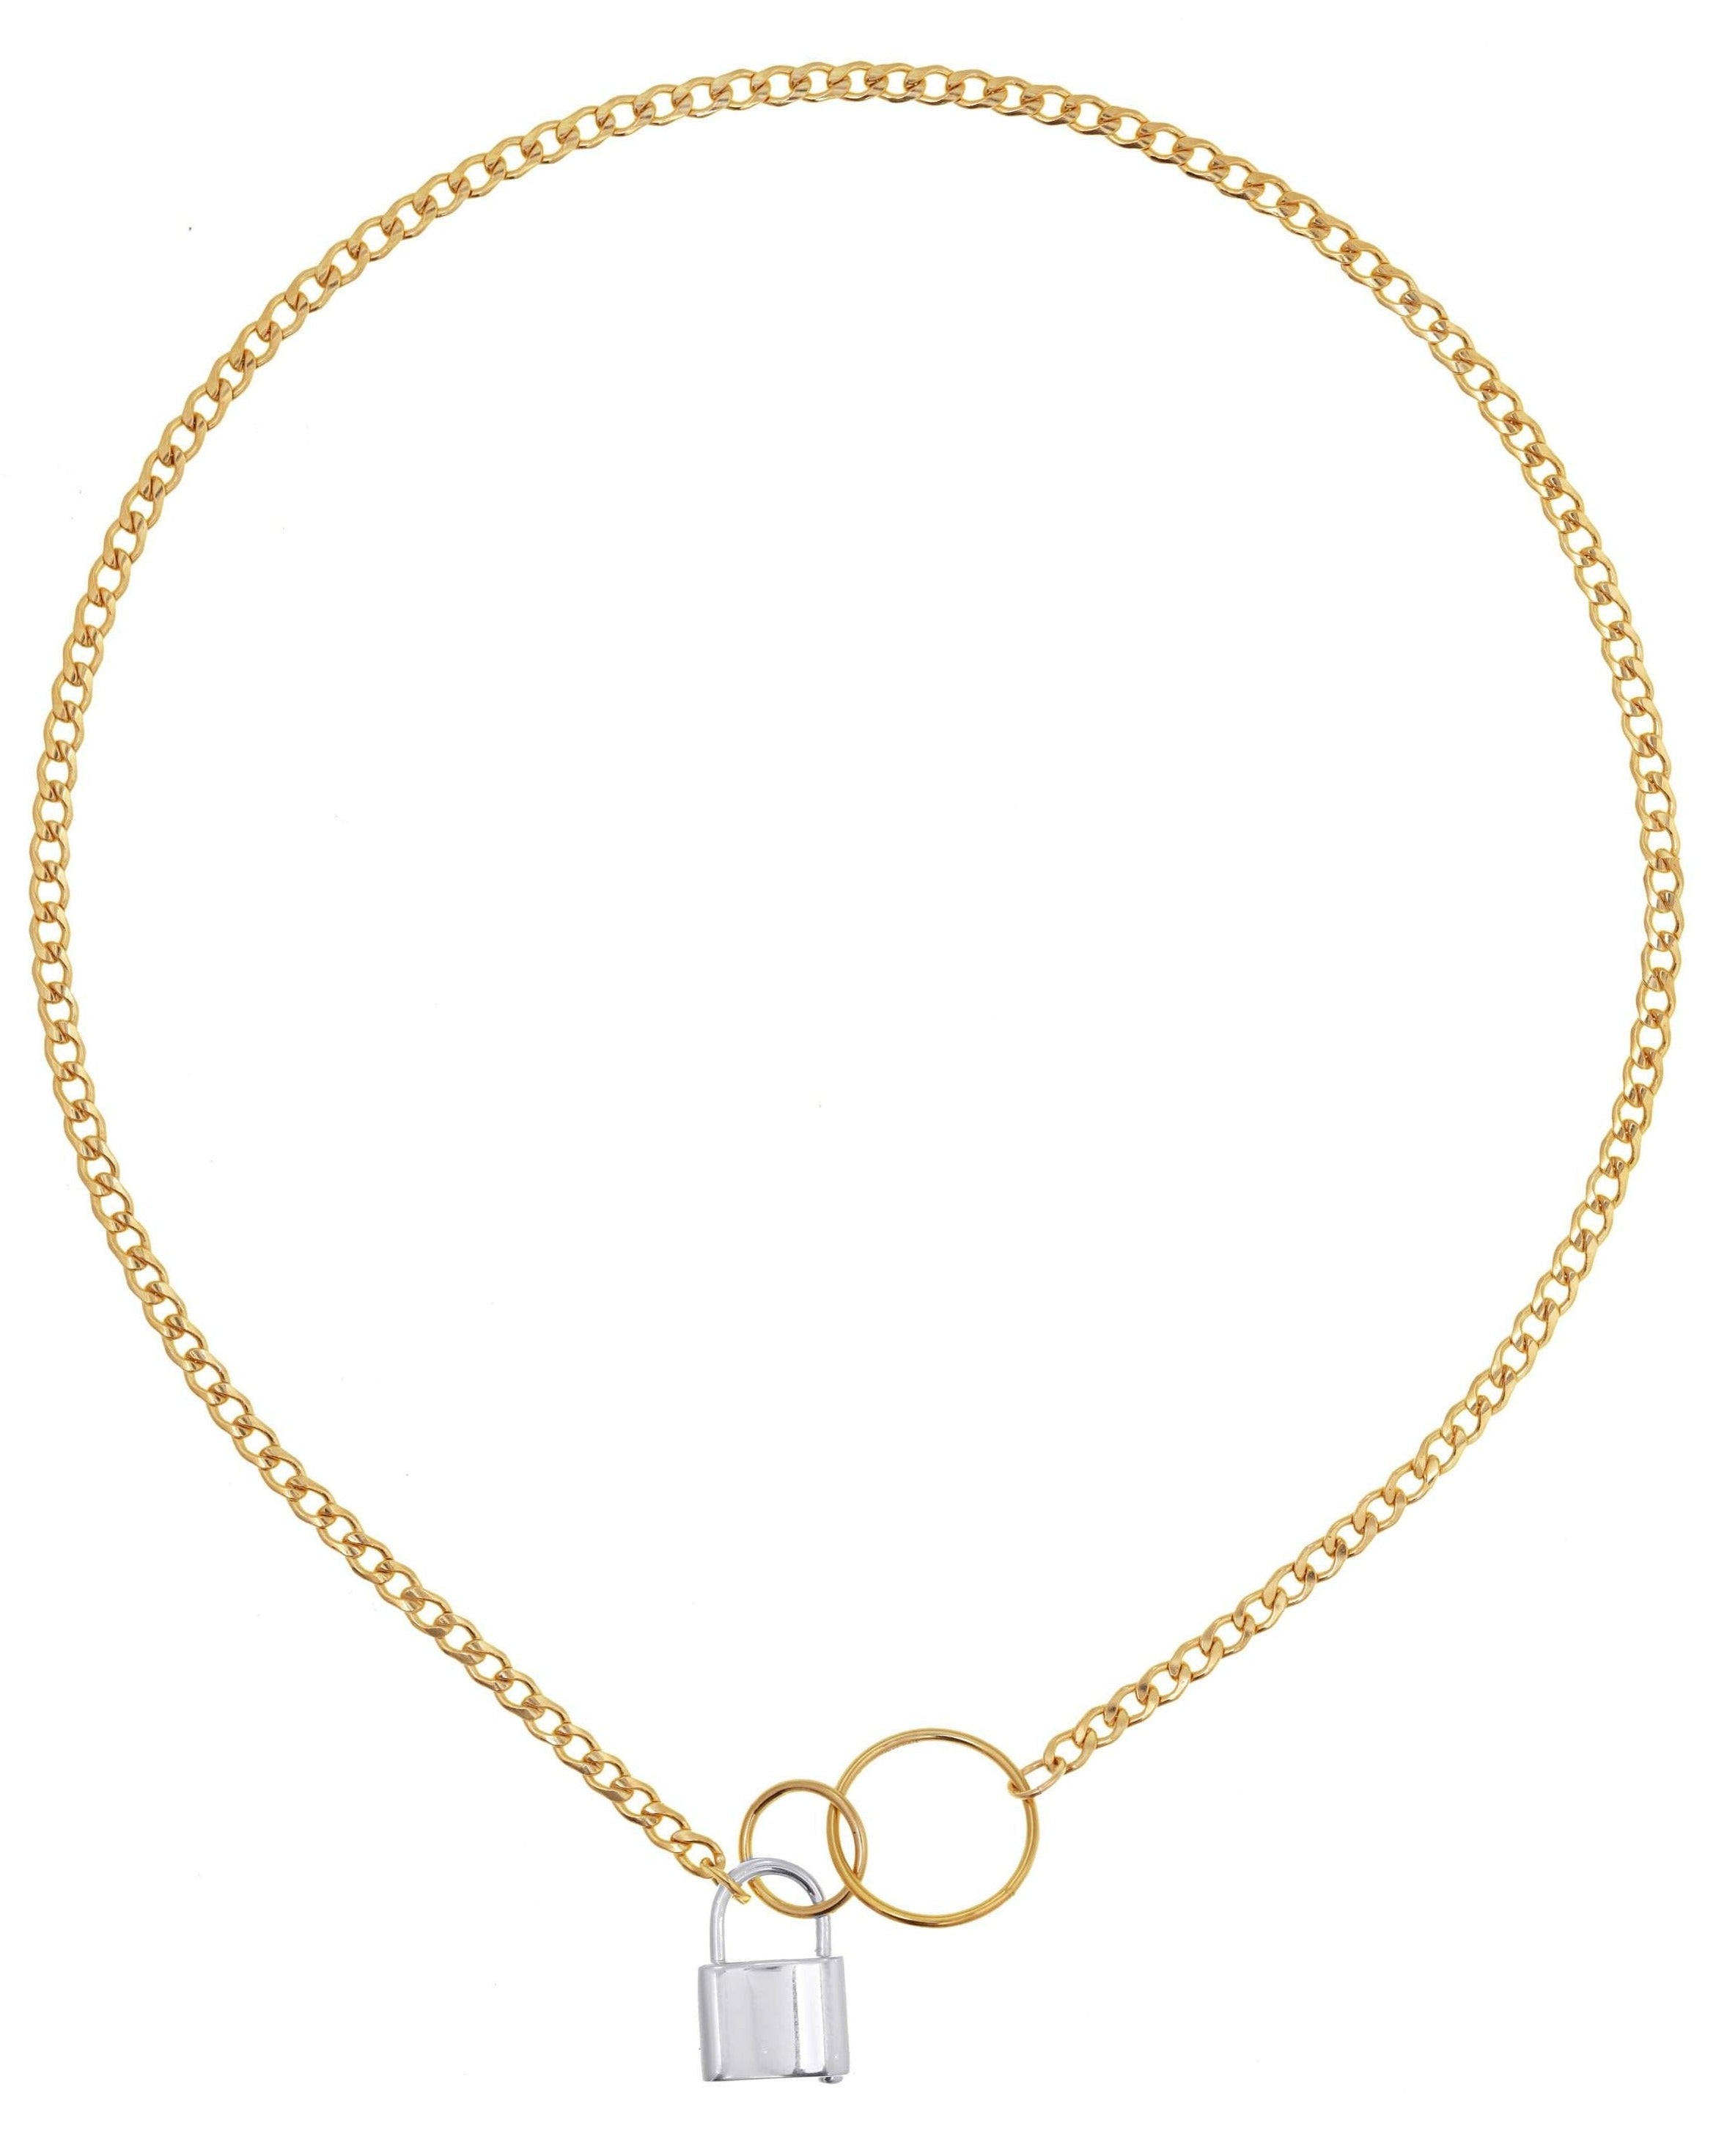 Amanto Necklace by KOZAKH. A 16 inch long necklace in 14K Gold Filled, featuring a Sterling Silver Padlock closure.